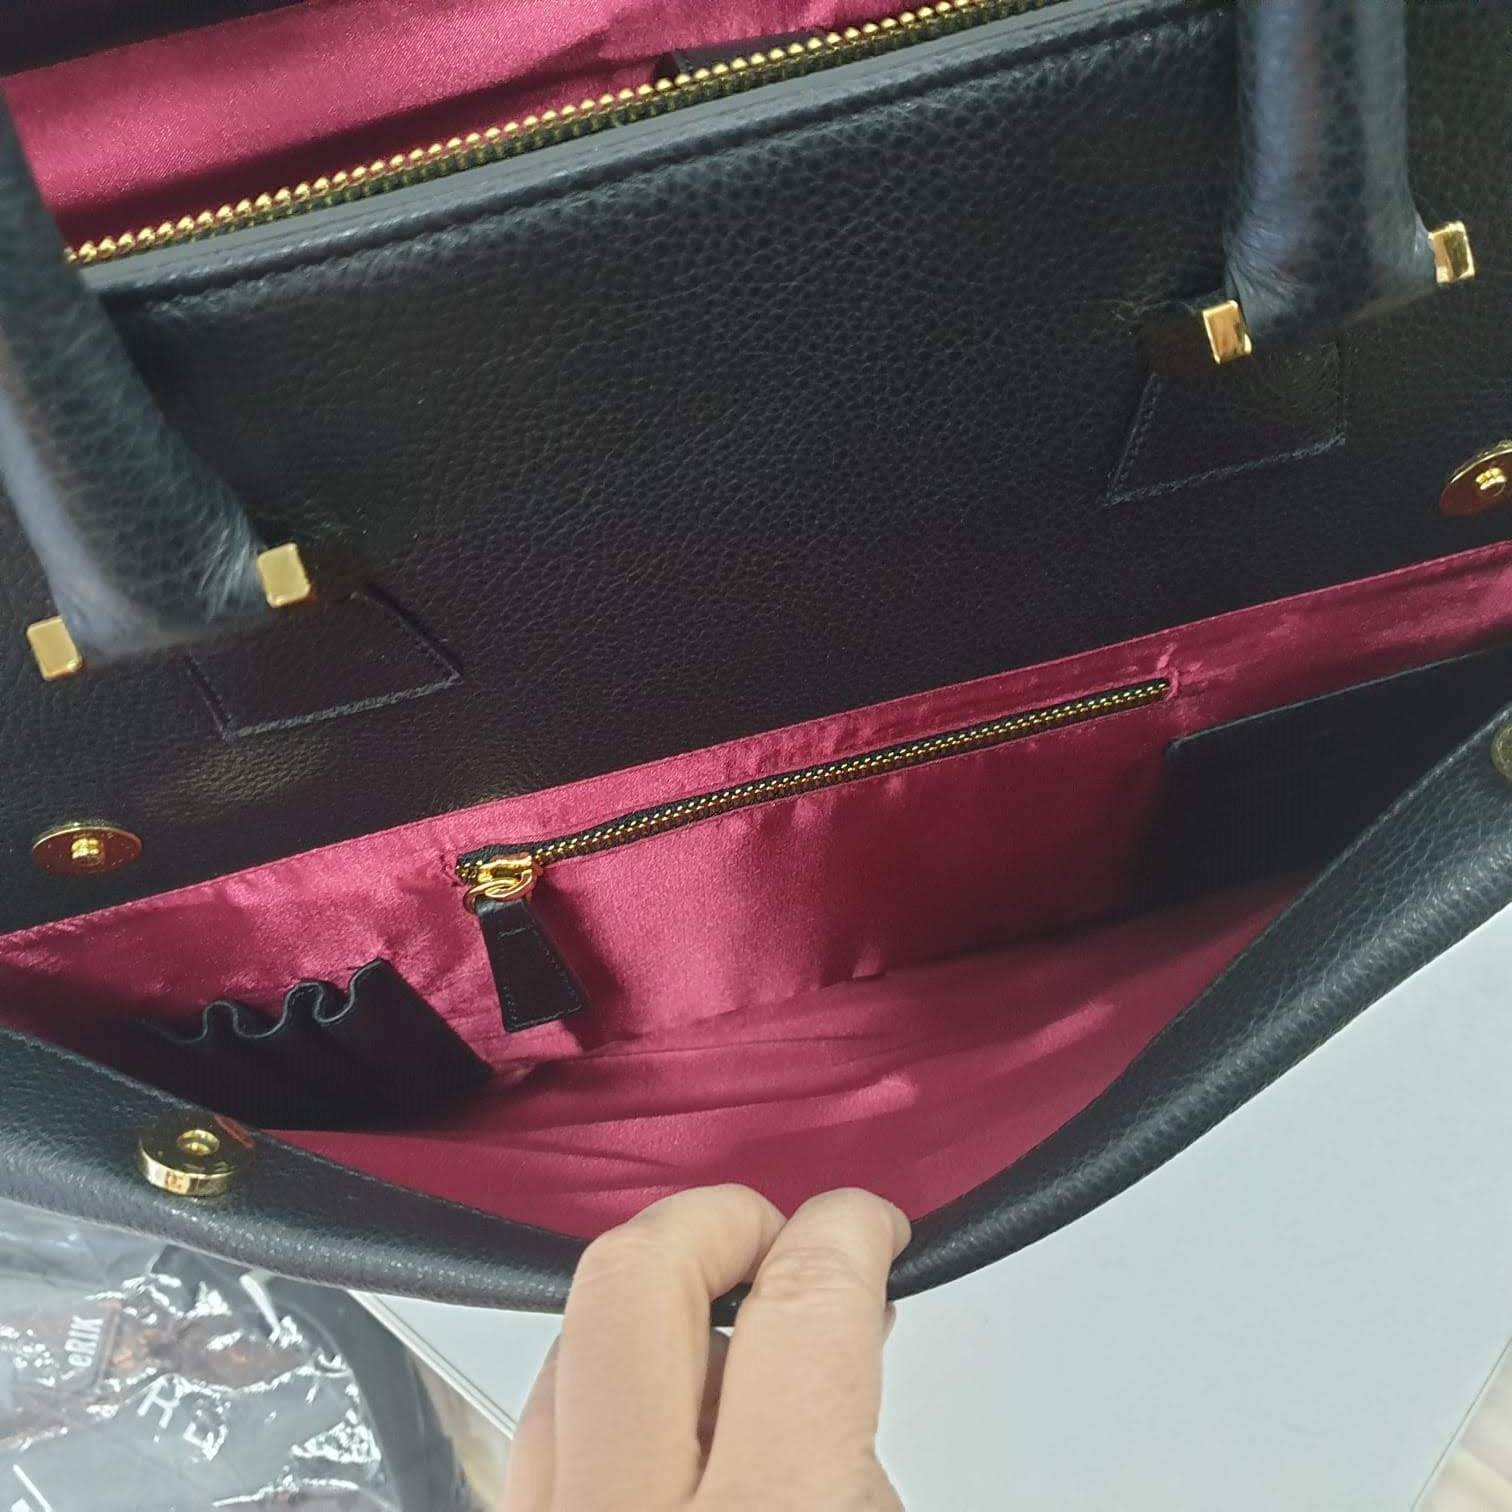 inside of a large black leather laptop bag in a bright shiny fabric